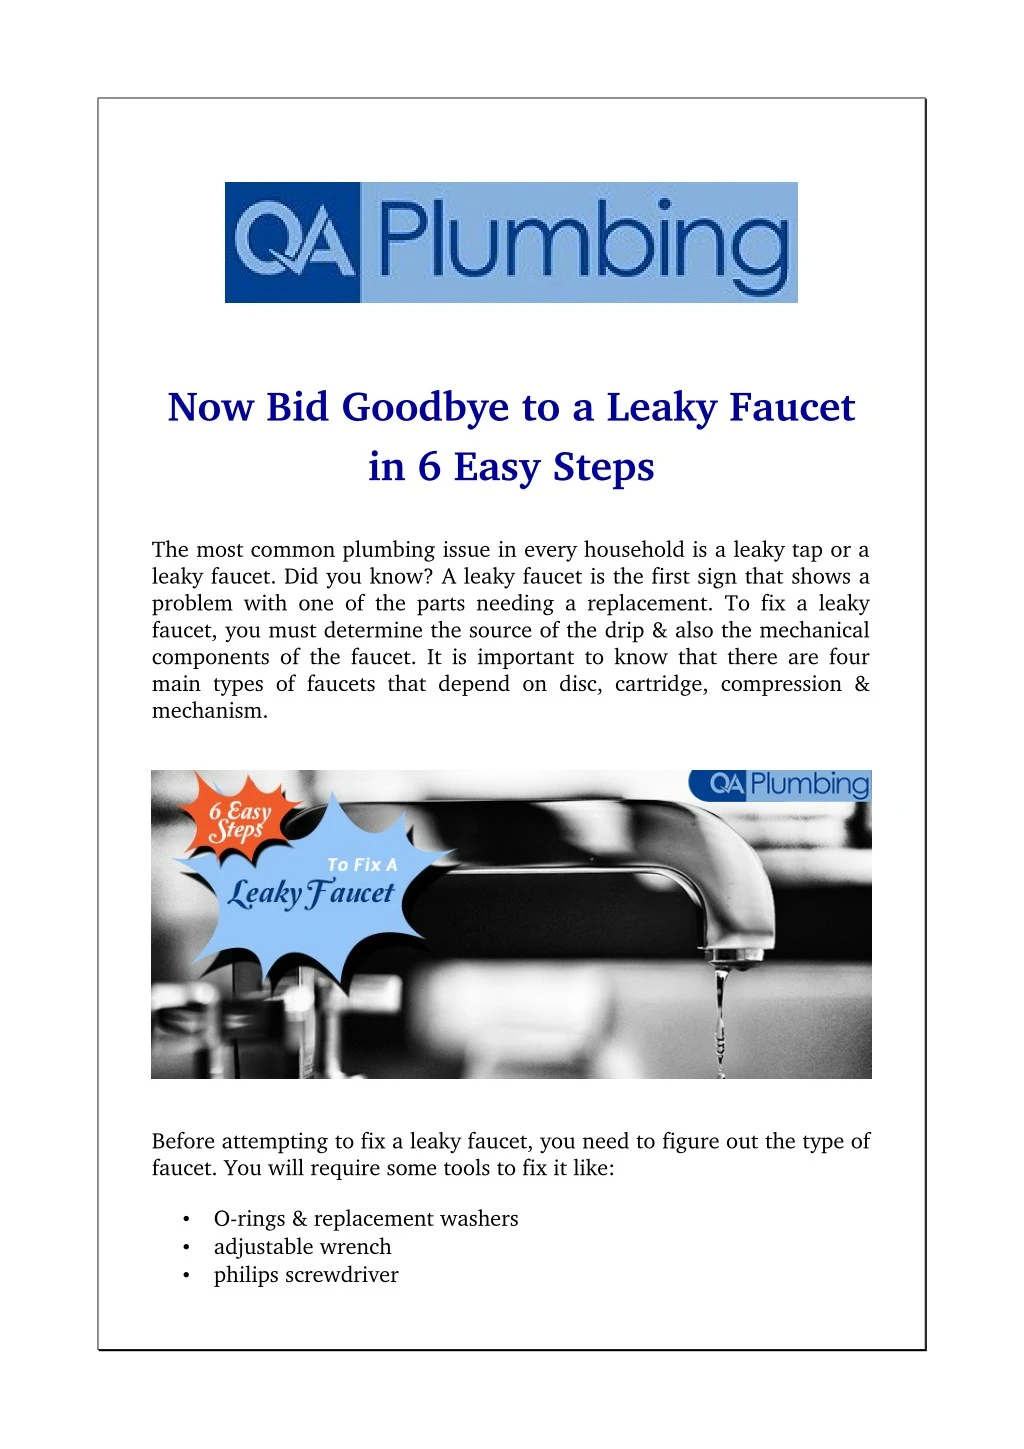 now bid goodbye to a leaky faucet in 6 easy steps